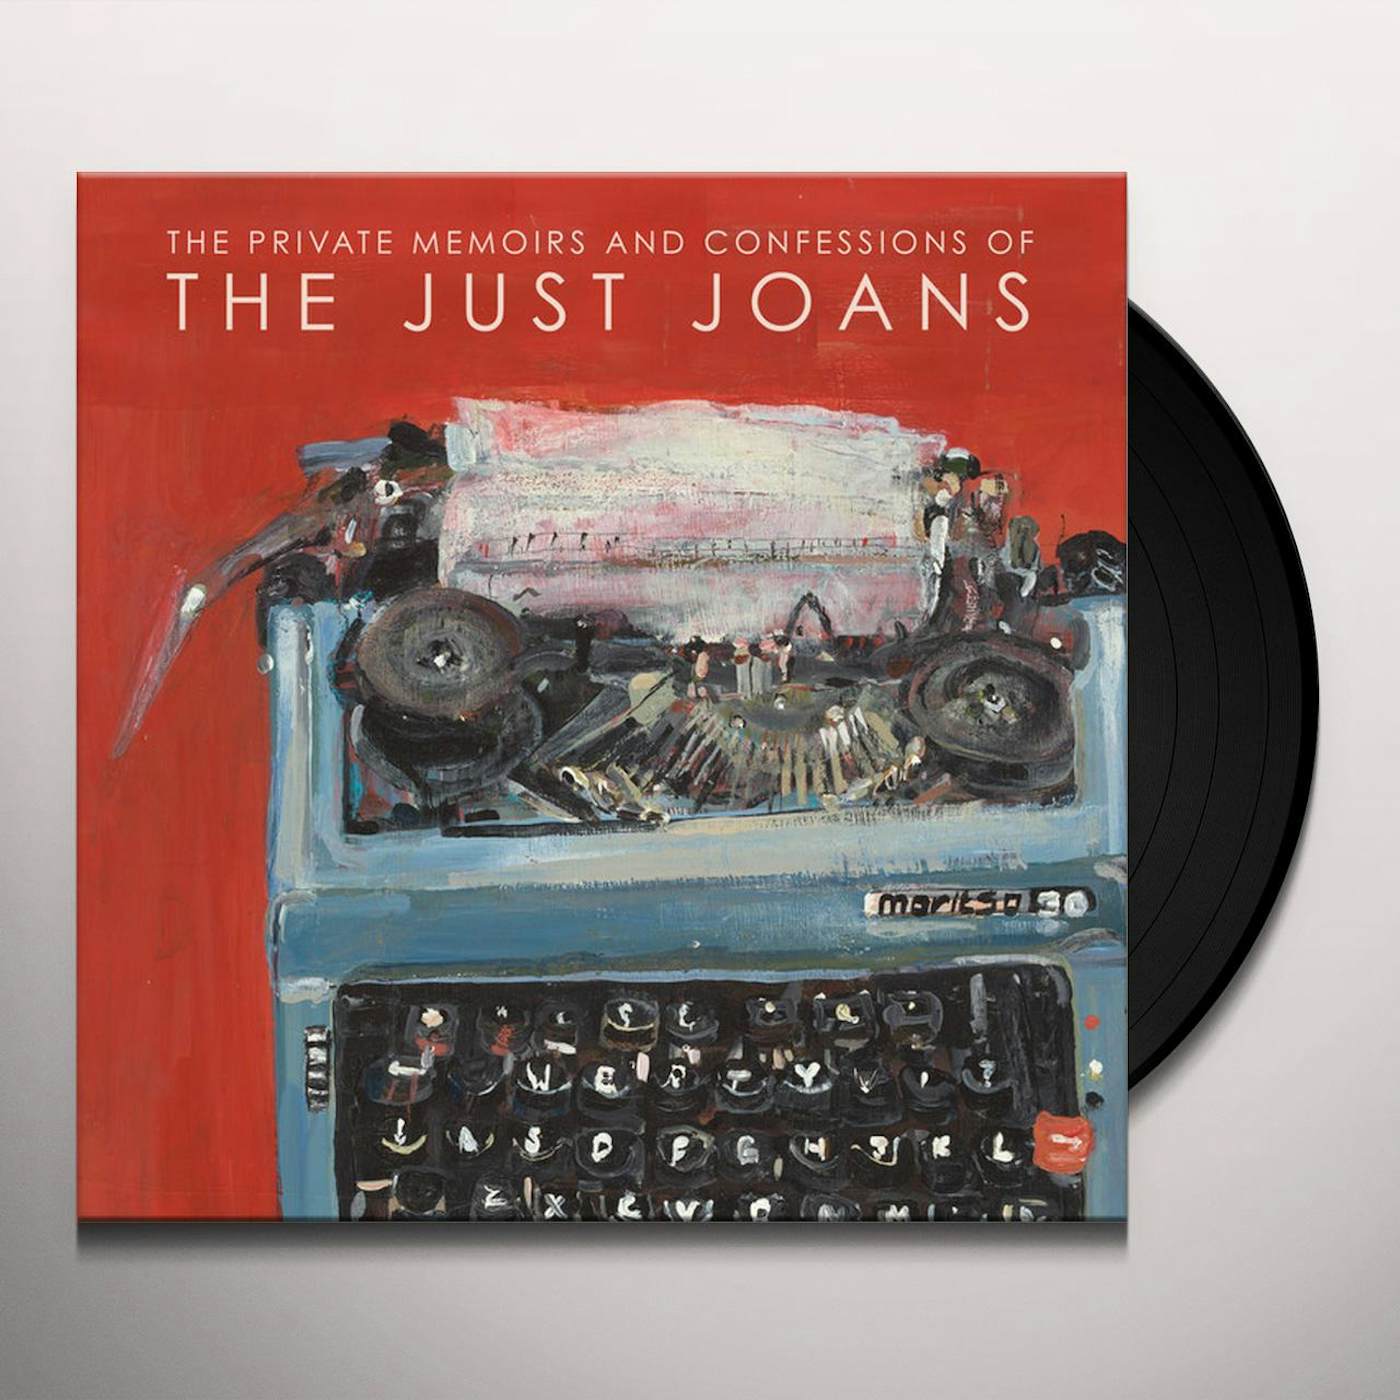 PRIVATE MEMOIRS & CONFESSIONS OF THE JUST JOANS (DL CARD) Vinyl Record